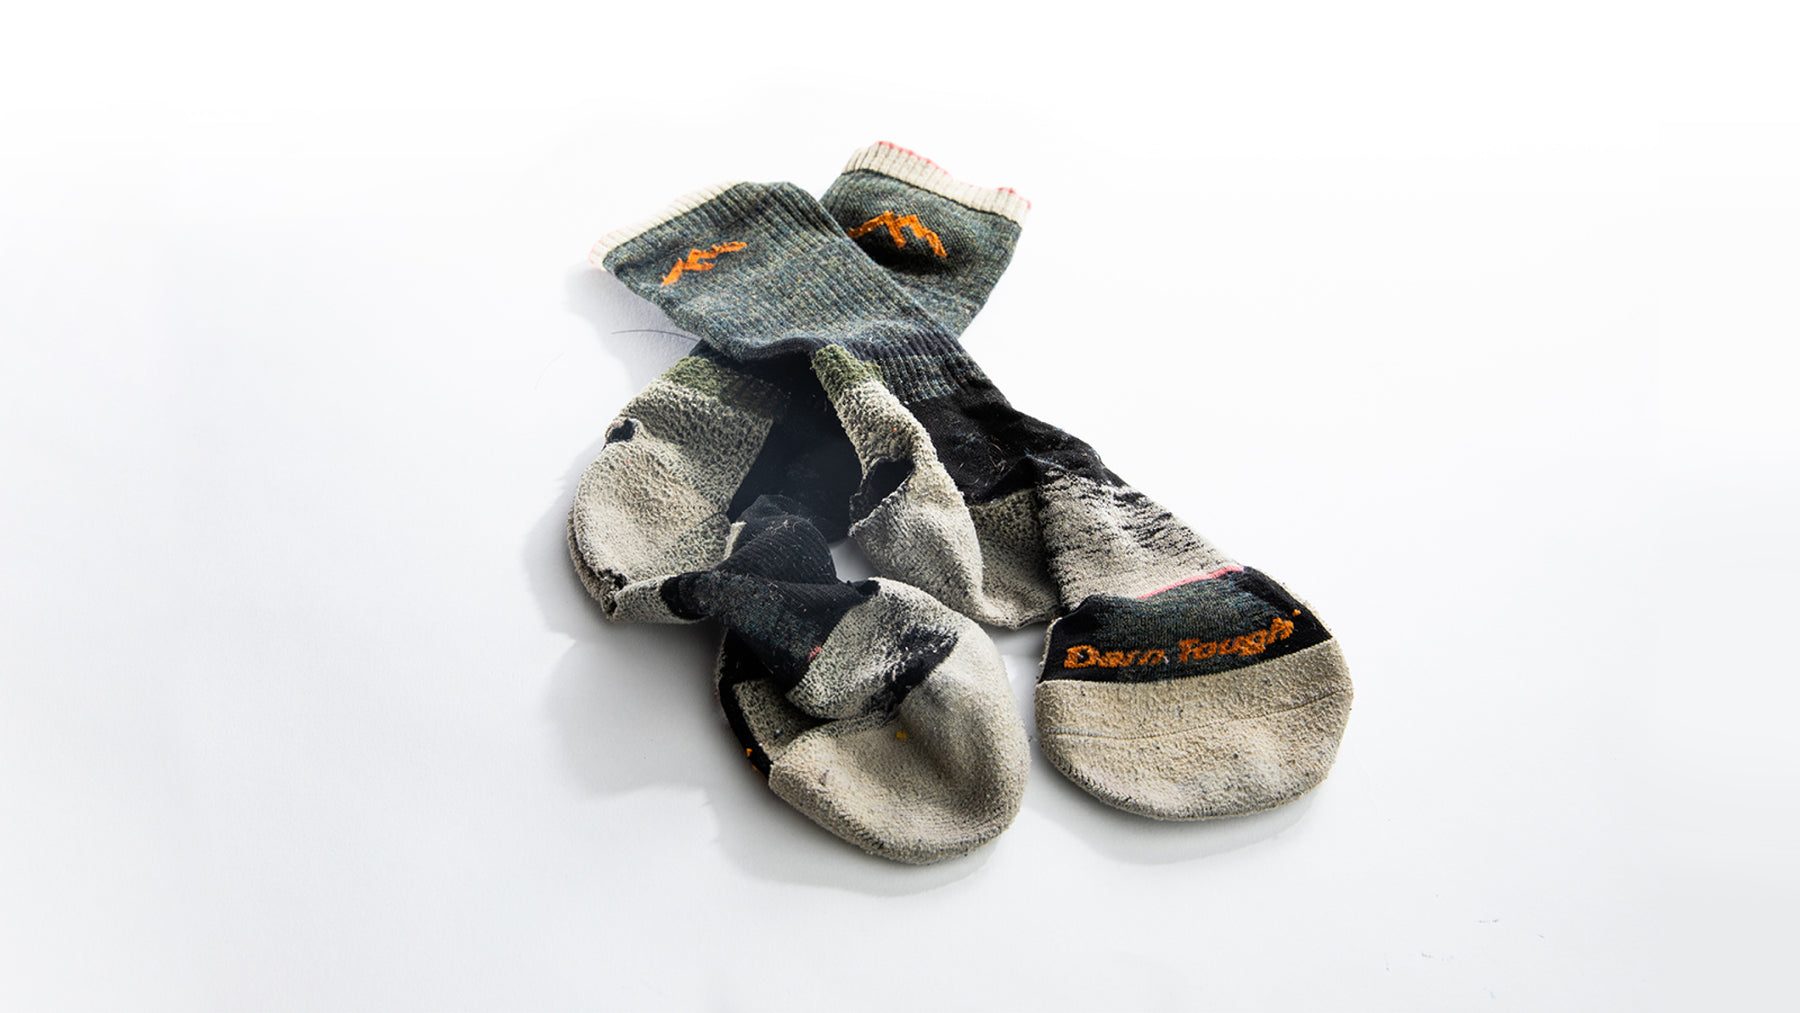 A pair of darn tough socks with holes that are ready to be sent to our warranty team